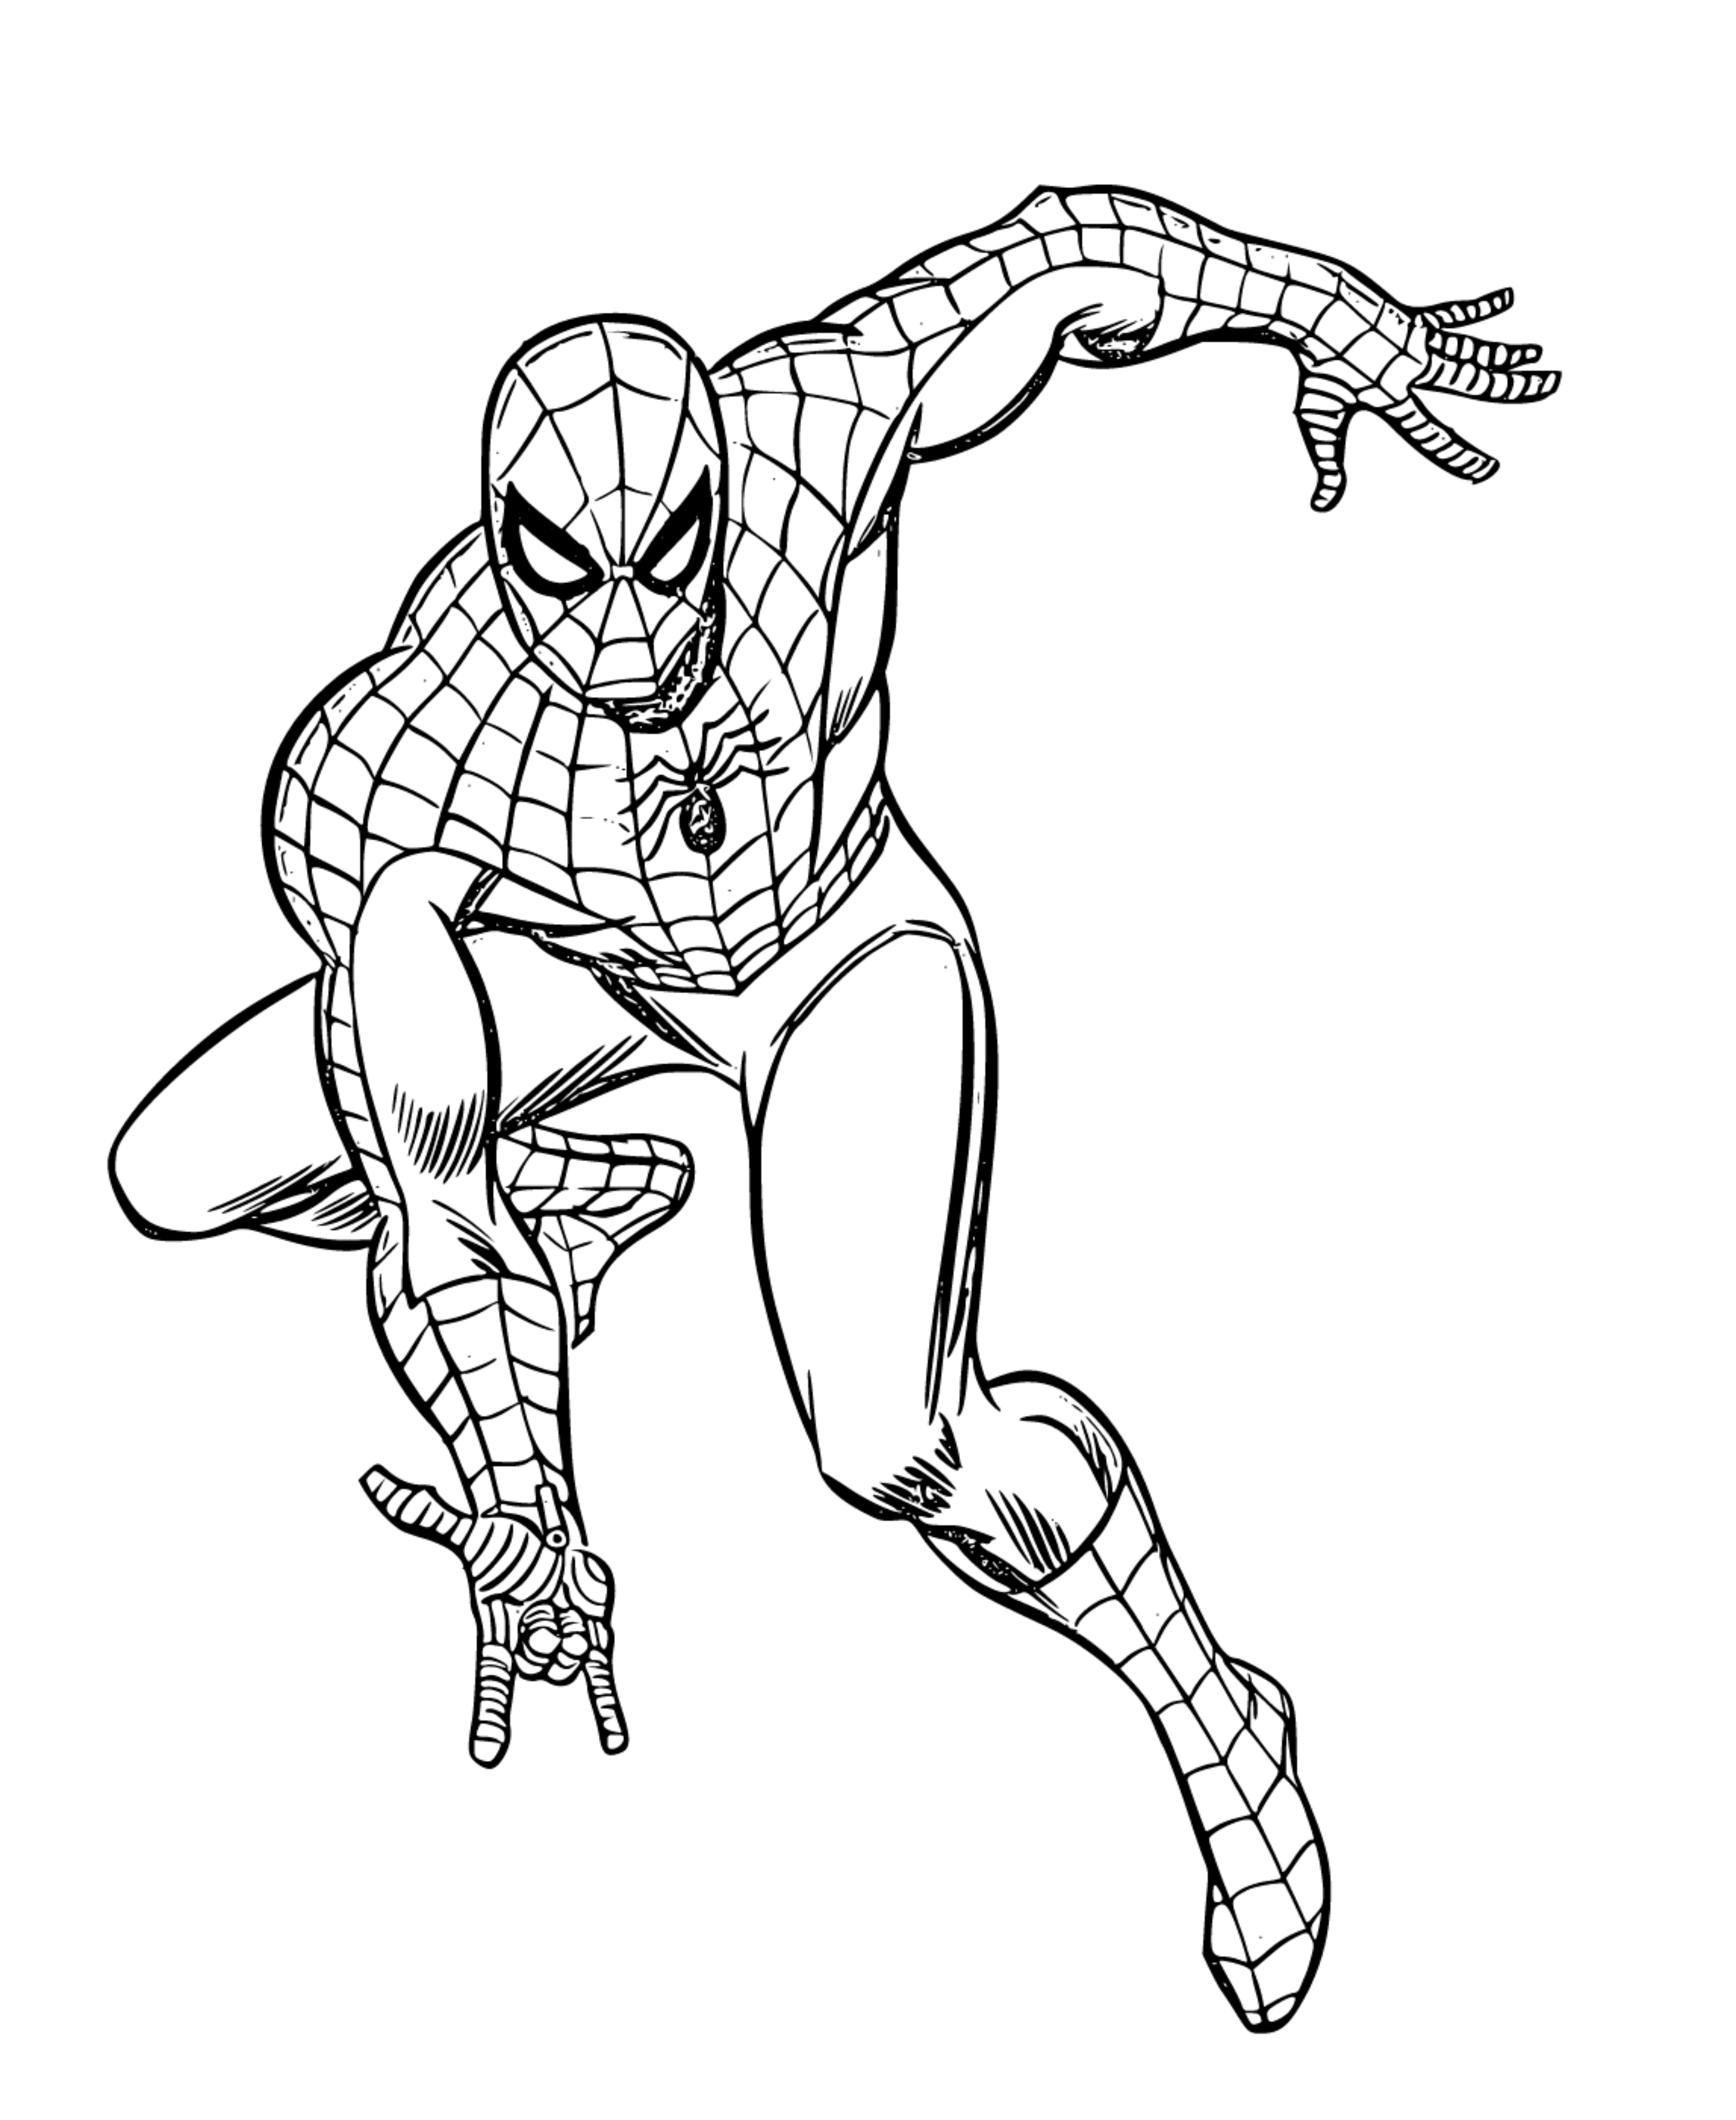 Spiderman Coloring Pages for Kids - SheetalColor.com